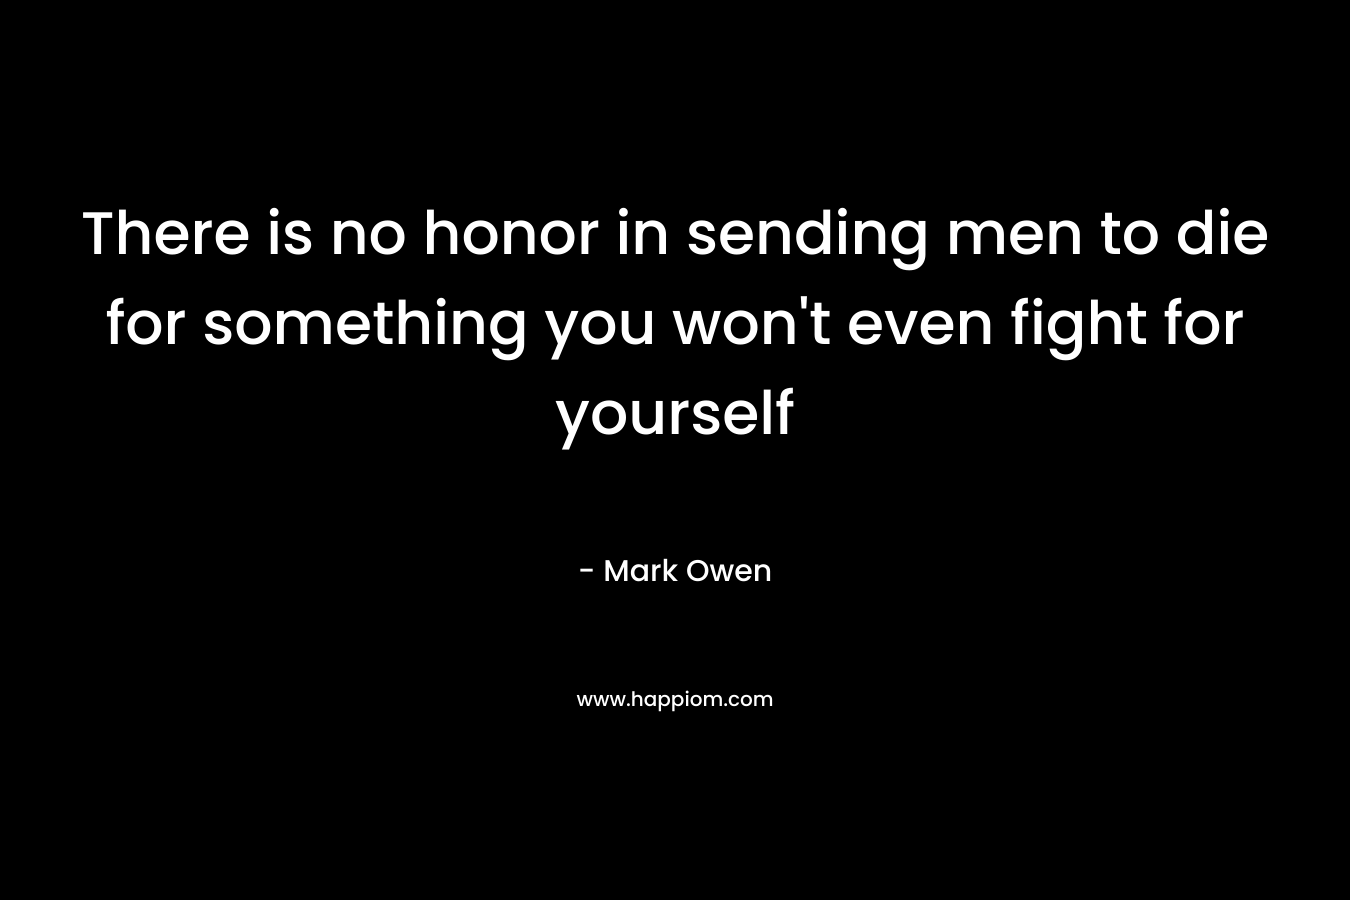 There is no honor in sending men to die for something you won’t even fight for yourself – Mark Owen